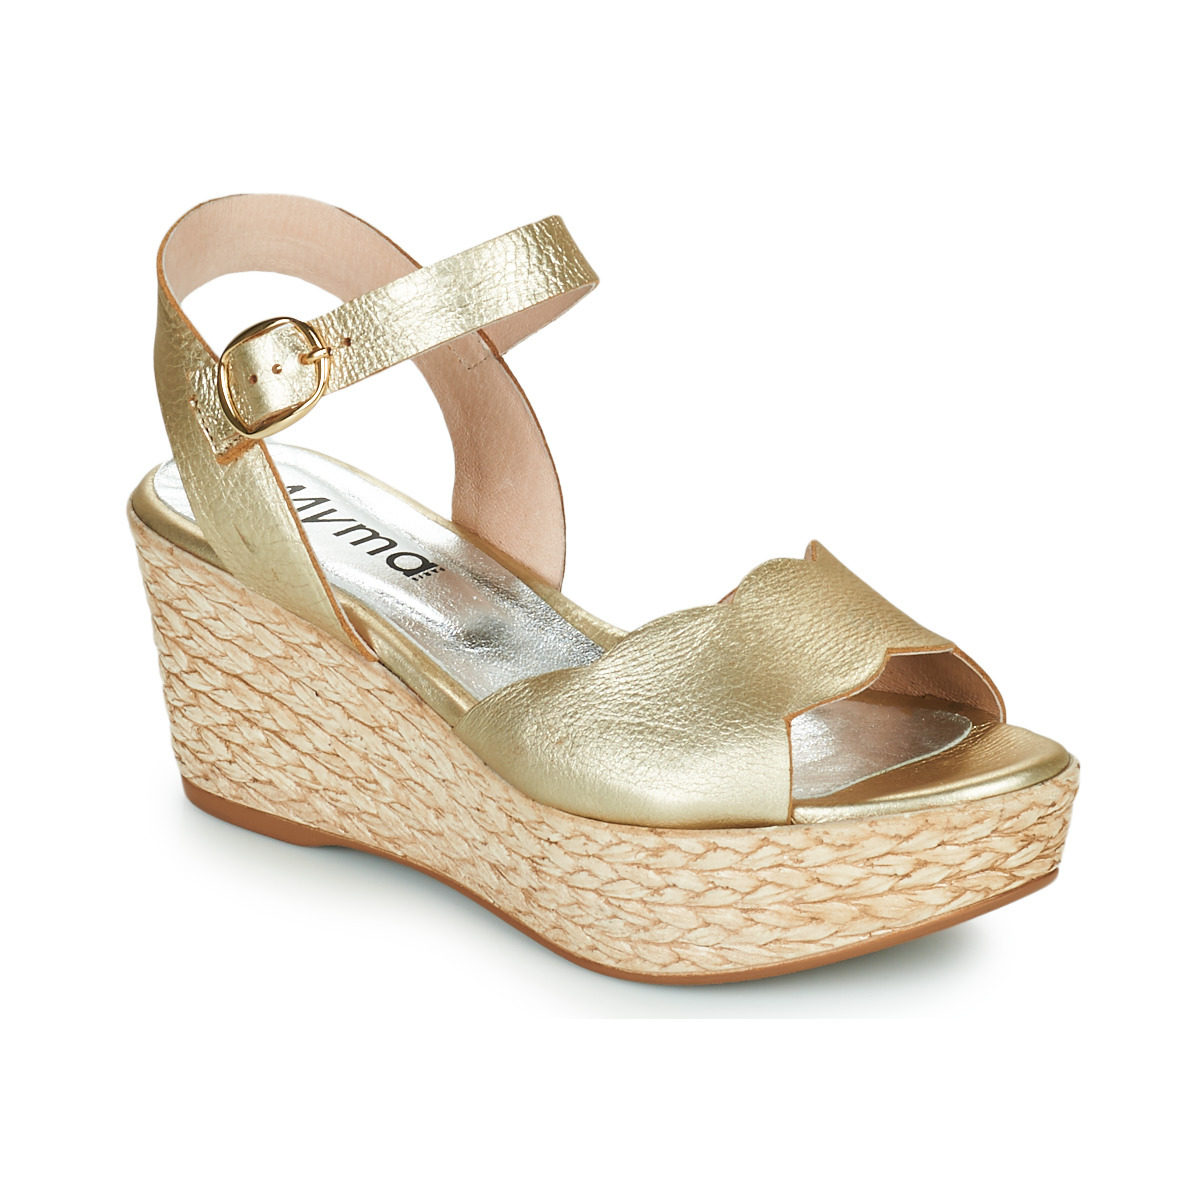 Myma Sandals in Gold for Women at Spartoo GOOFASH